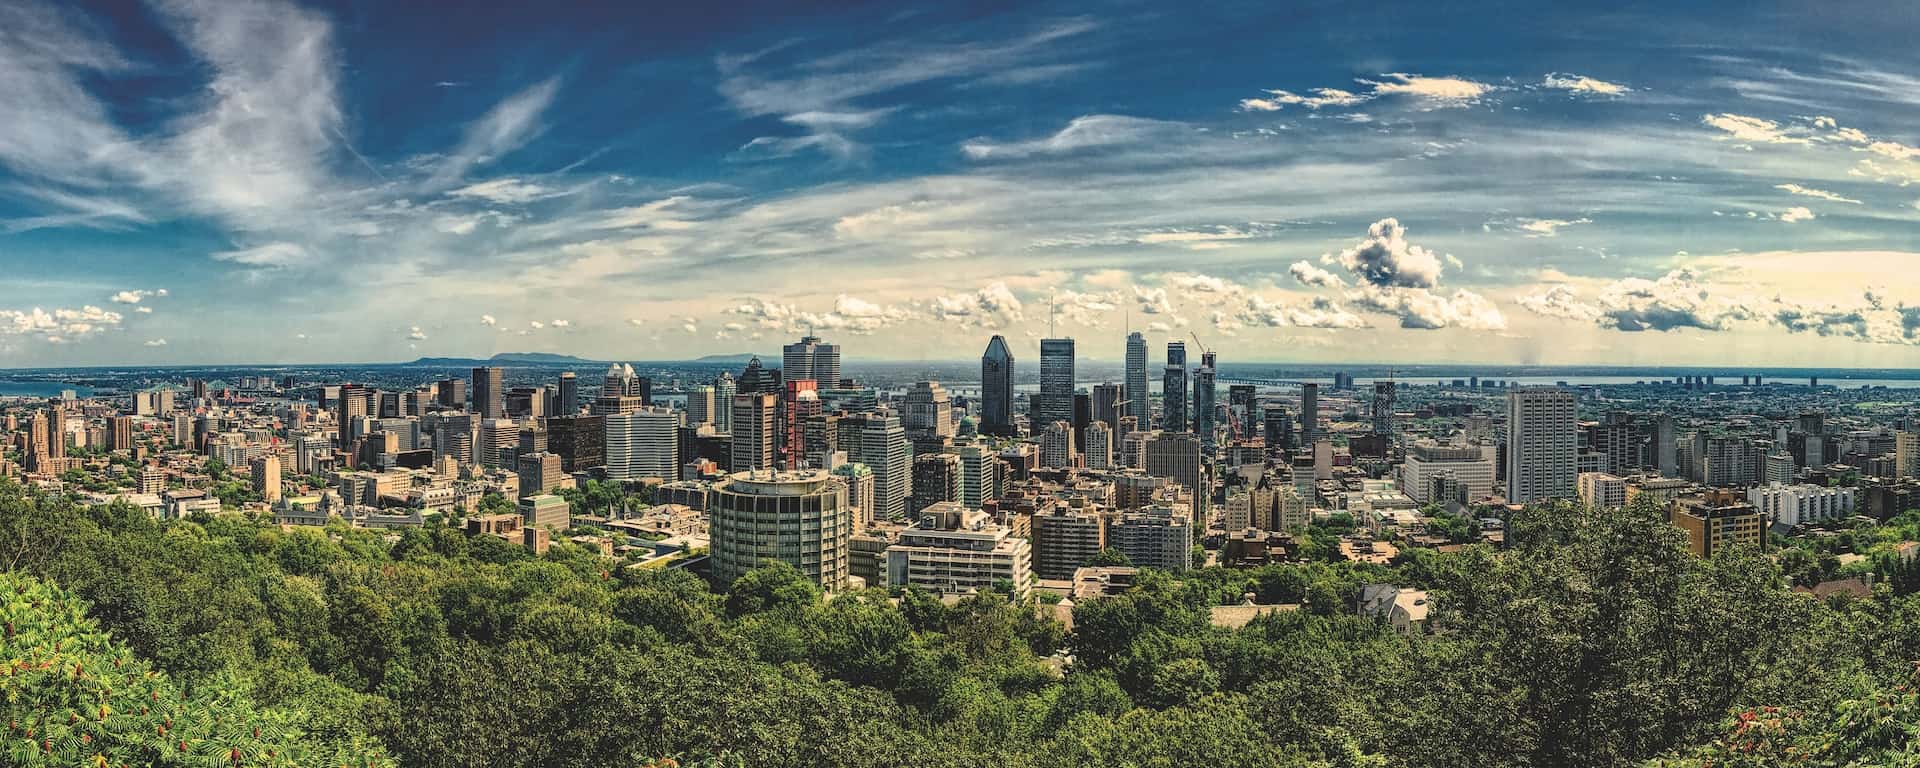 Best things to do in Montreal Canada - Craig Thorn - Montreal skyline from Mont Royal by Matthias Mullie on Unsplash